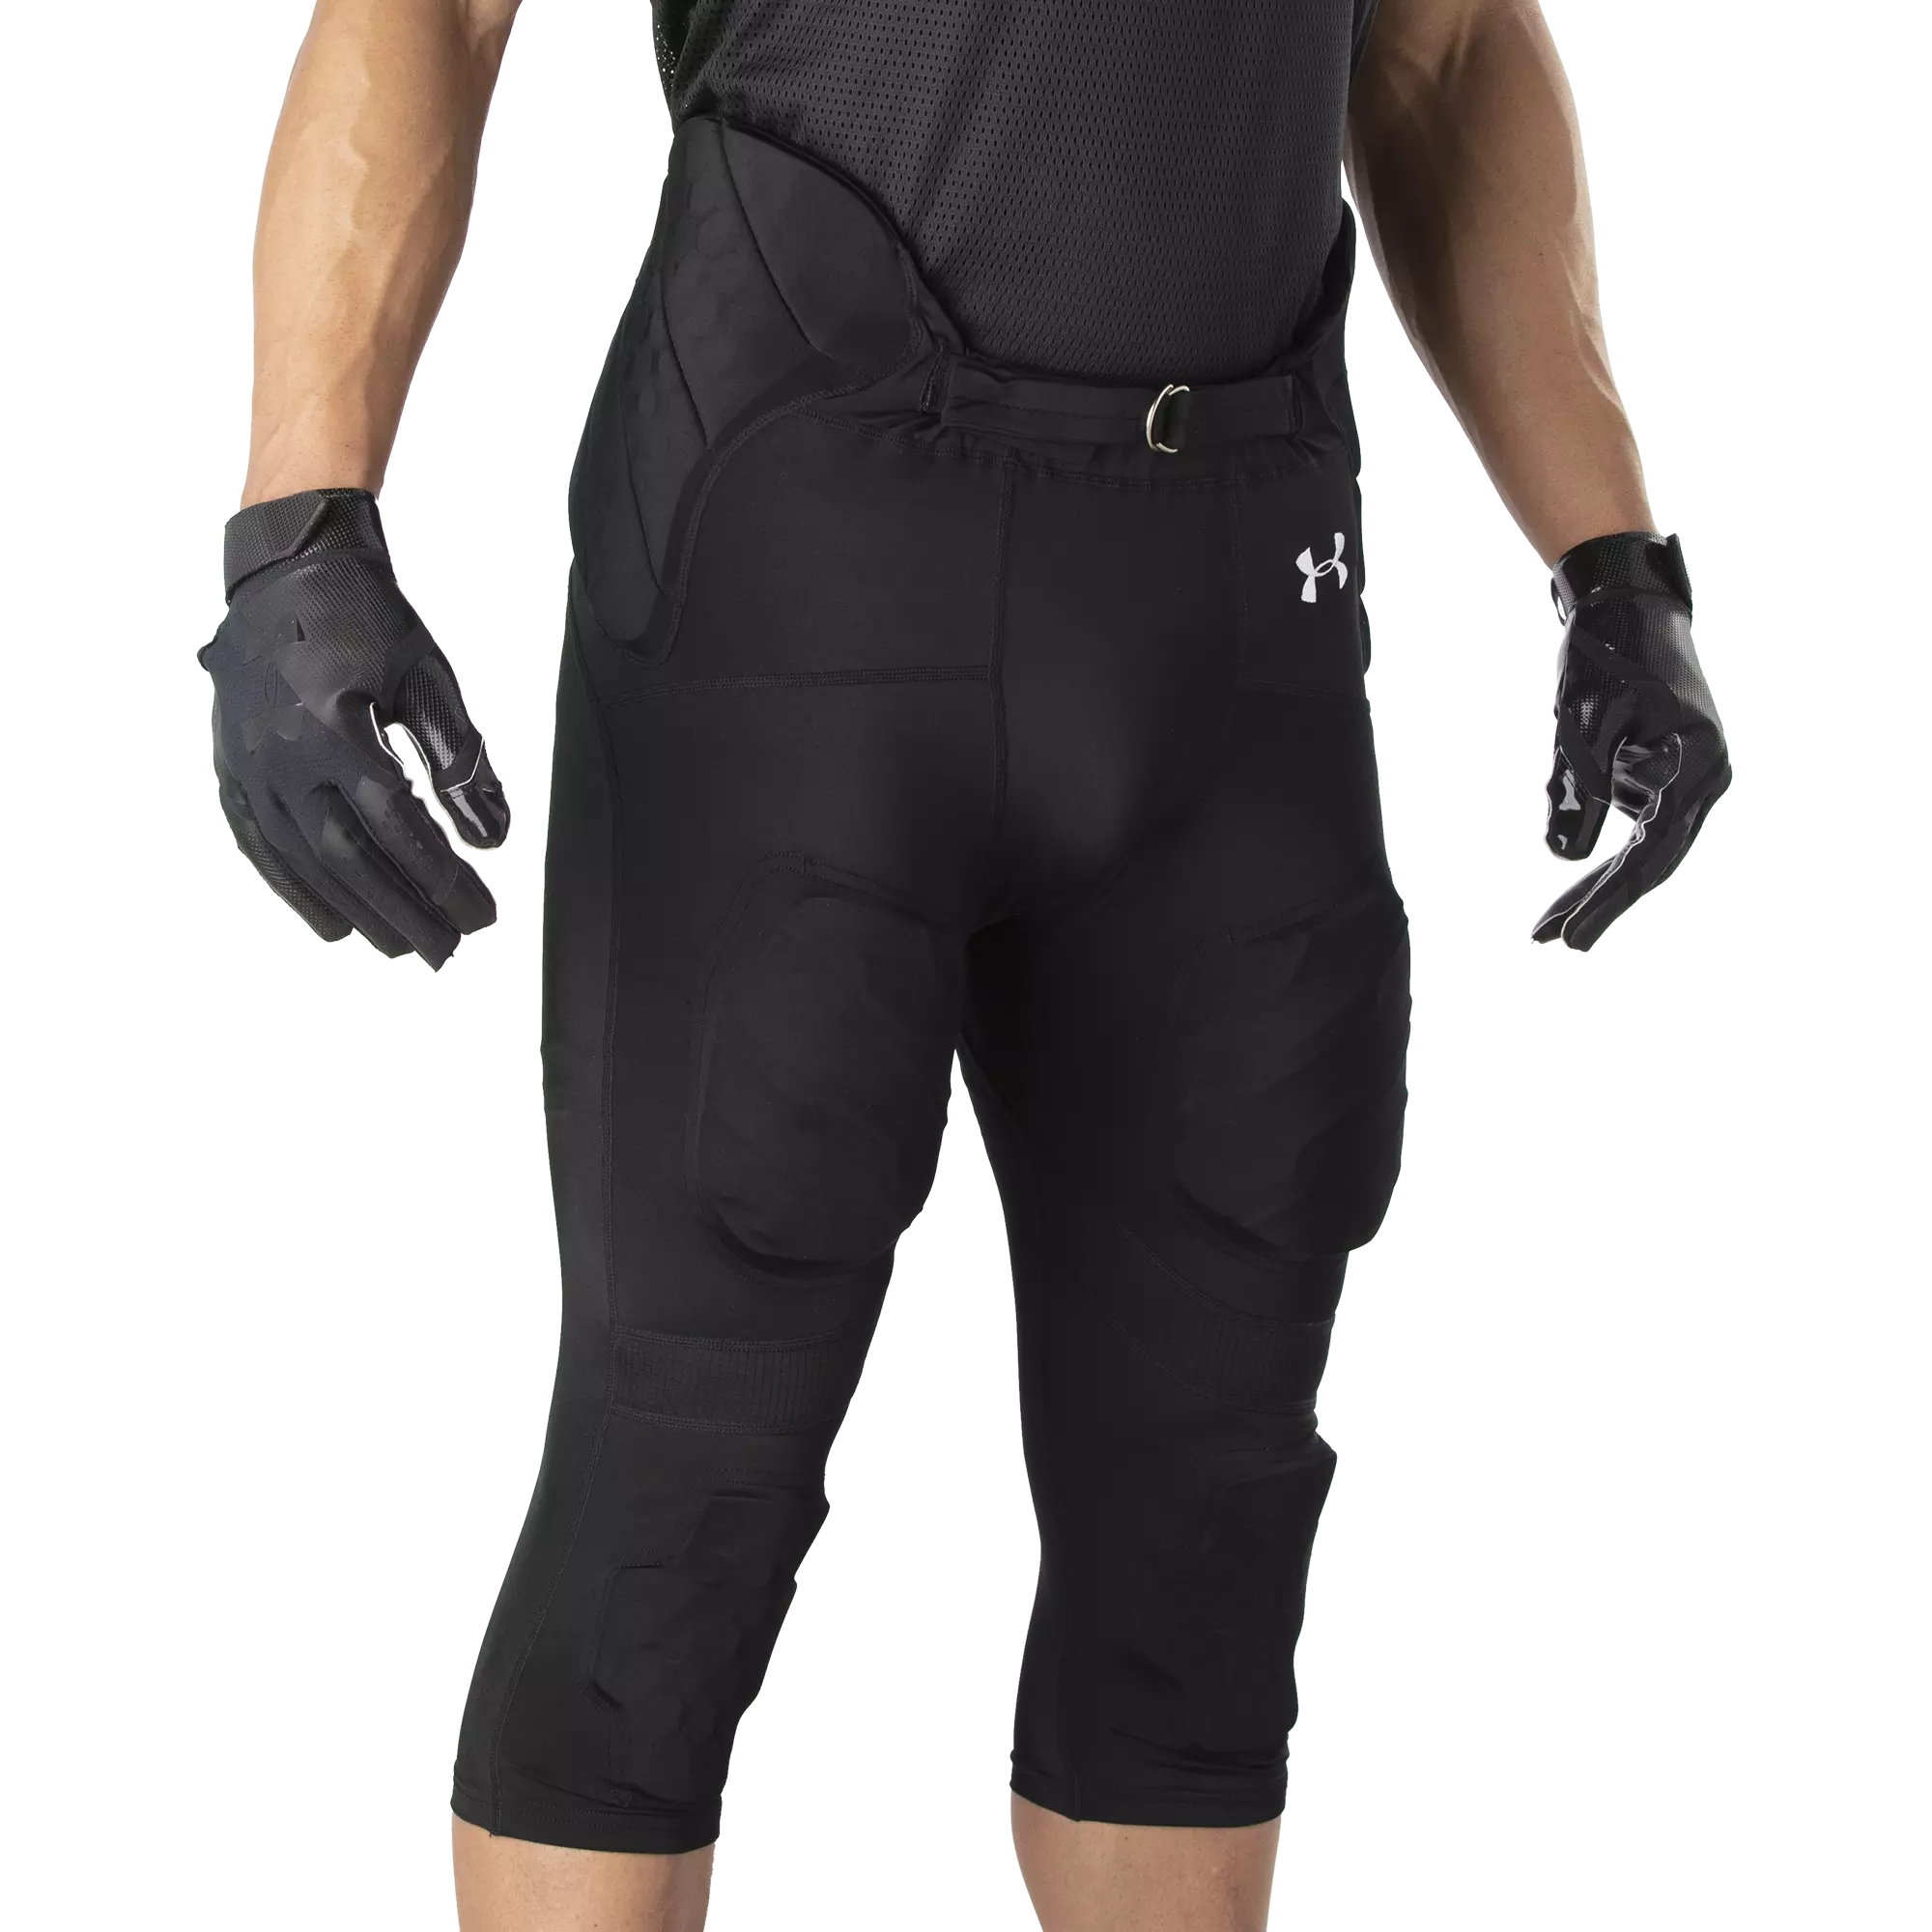 Under Armour Youth Gameday Armour Integrated Football Pant - Black